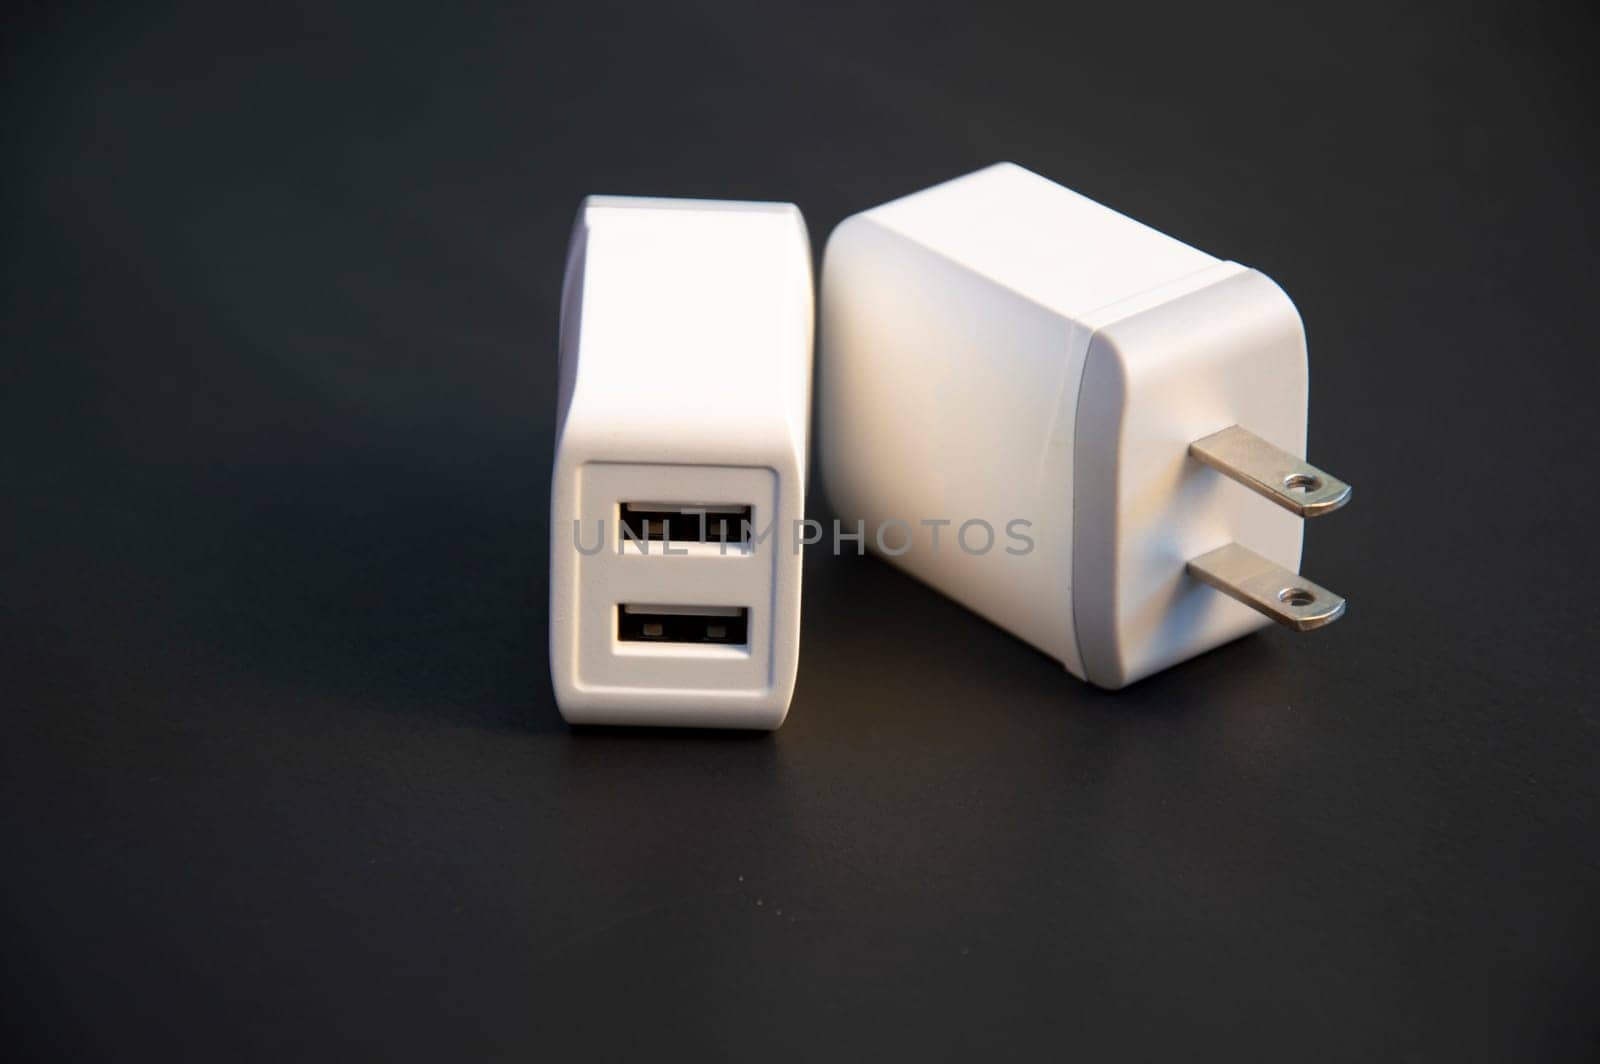 USB charger, white, 2-port type, placed on a black background